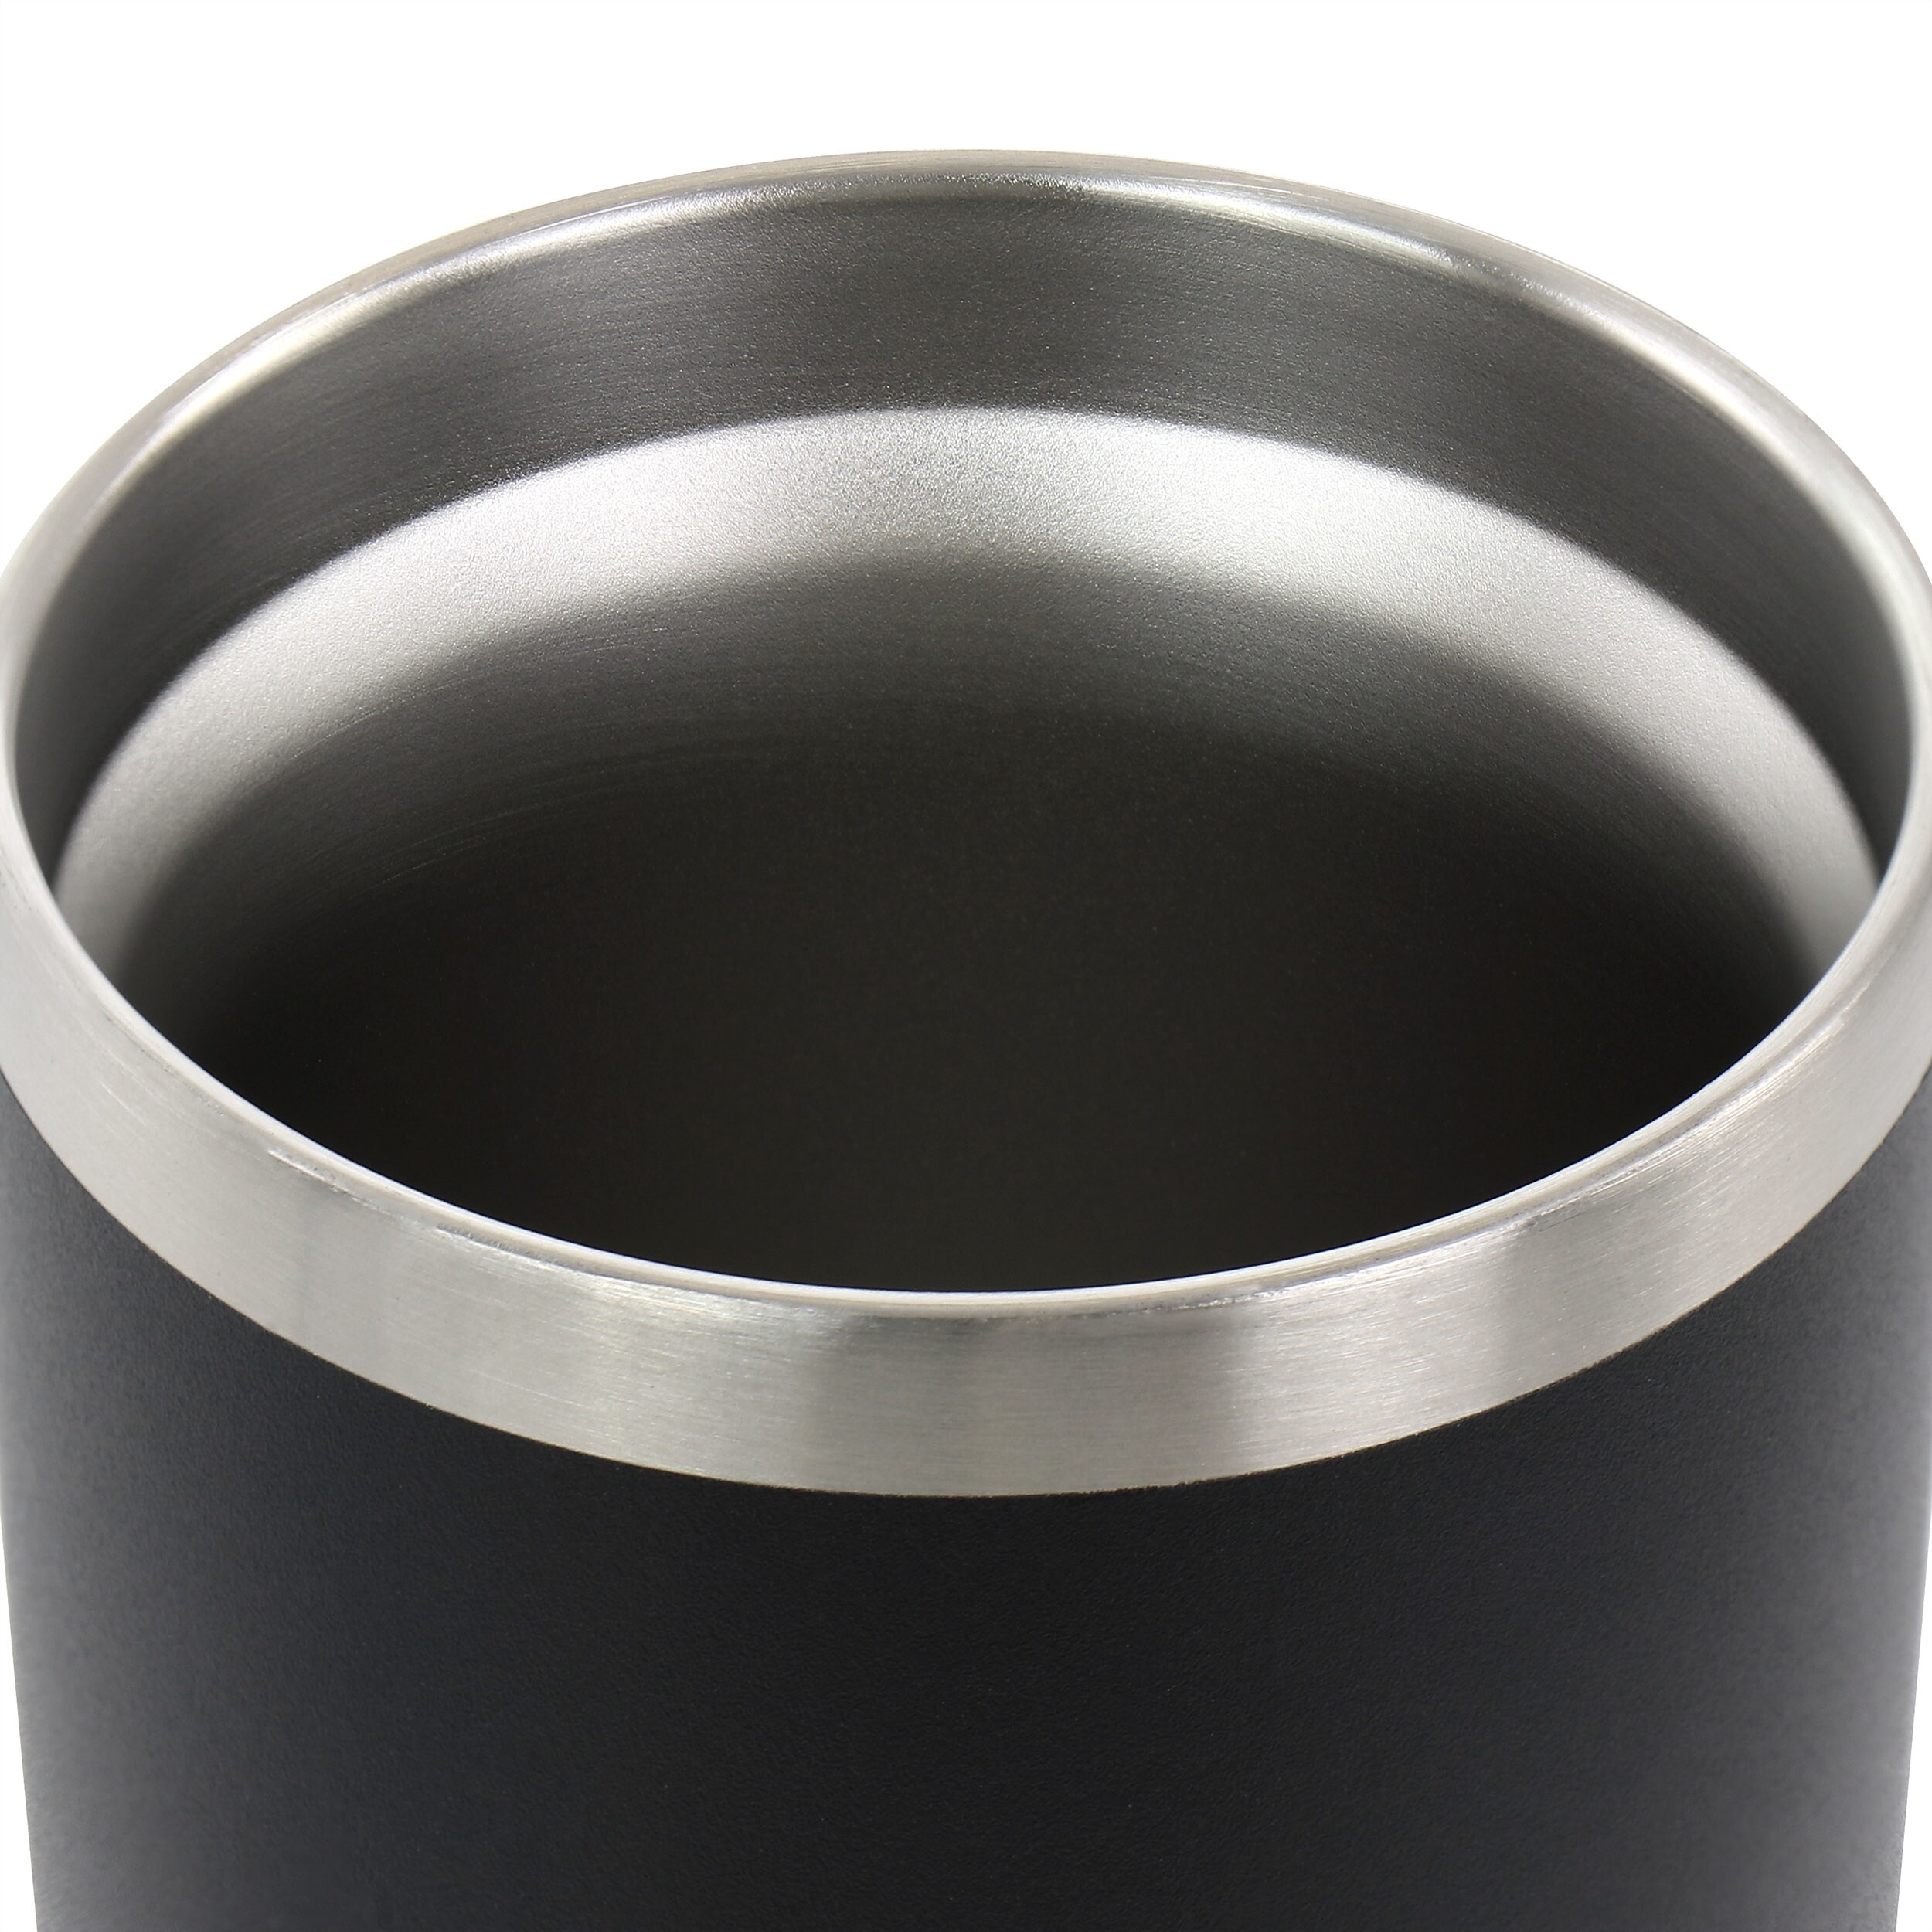 https://ak1.ostkcdn.com/images/products/is/images/direct/5b1279cd4ac71c3a82b57e1632123bac04818383/WAO-18oz-Thermal-Tumbler-with-Acrylic-Lid-in-Matte-Black.jpg